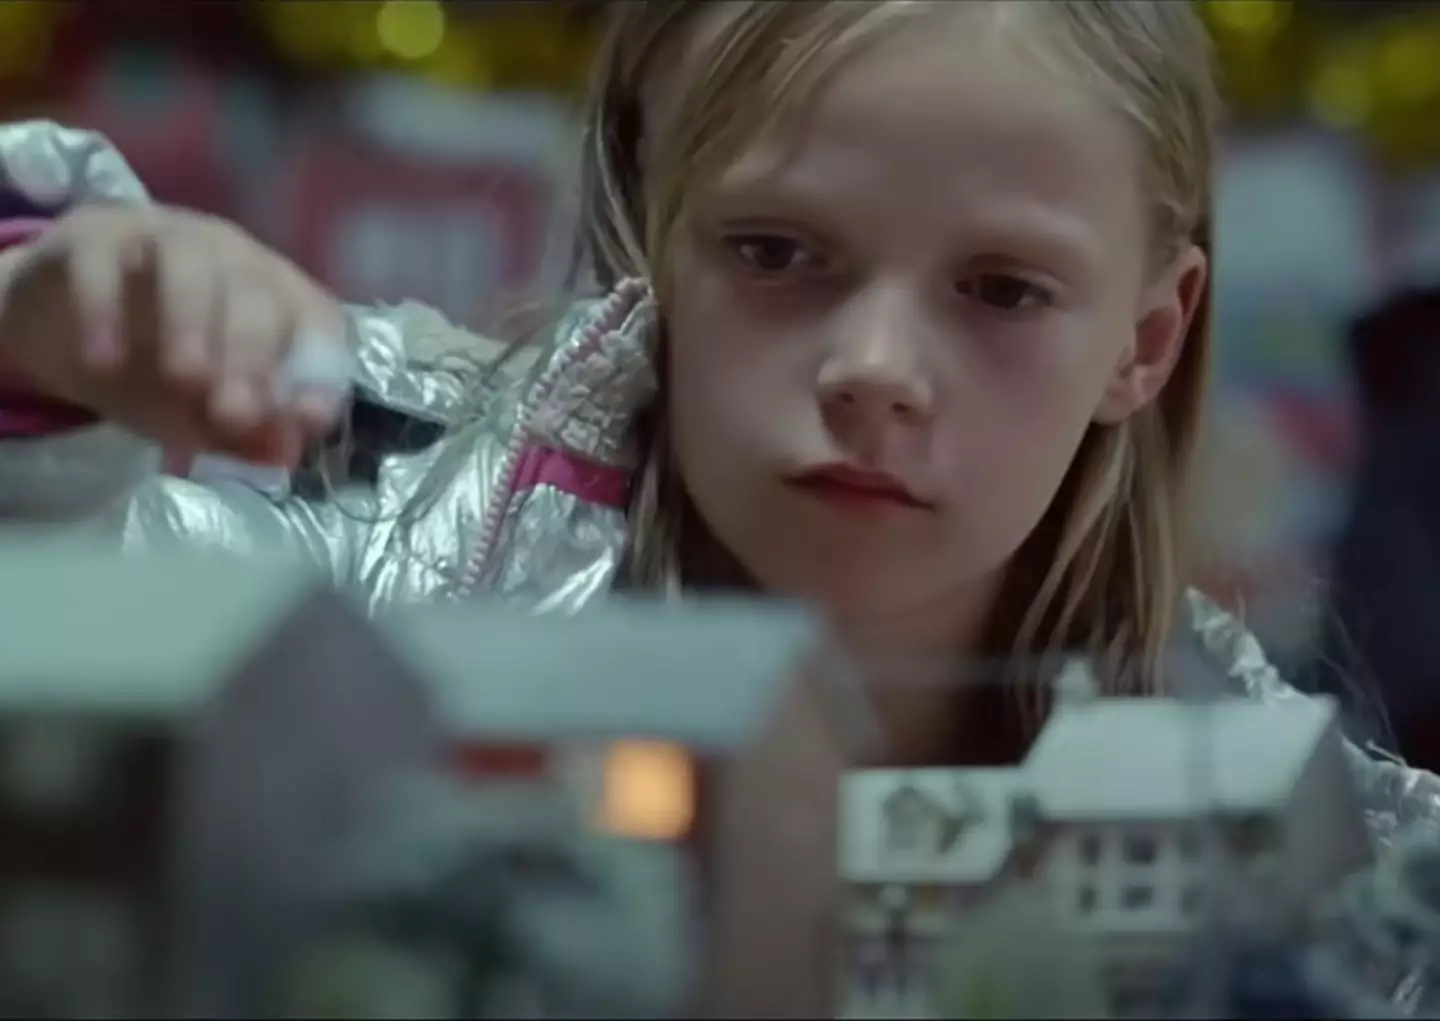 Shelter's 'Good as Gold' Christmas advert aims to raise awareness of the thousands of children who go without a proper home.